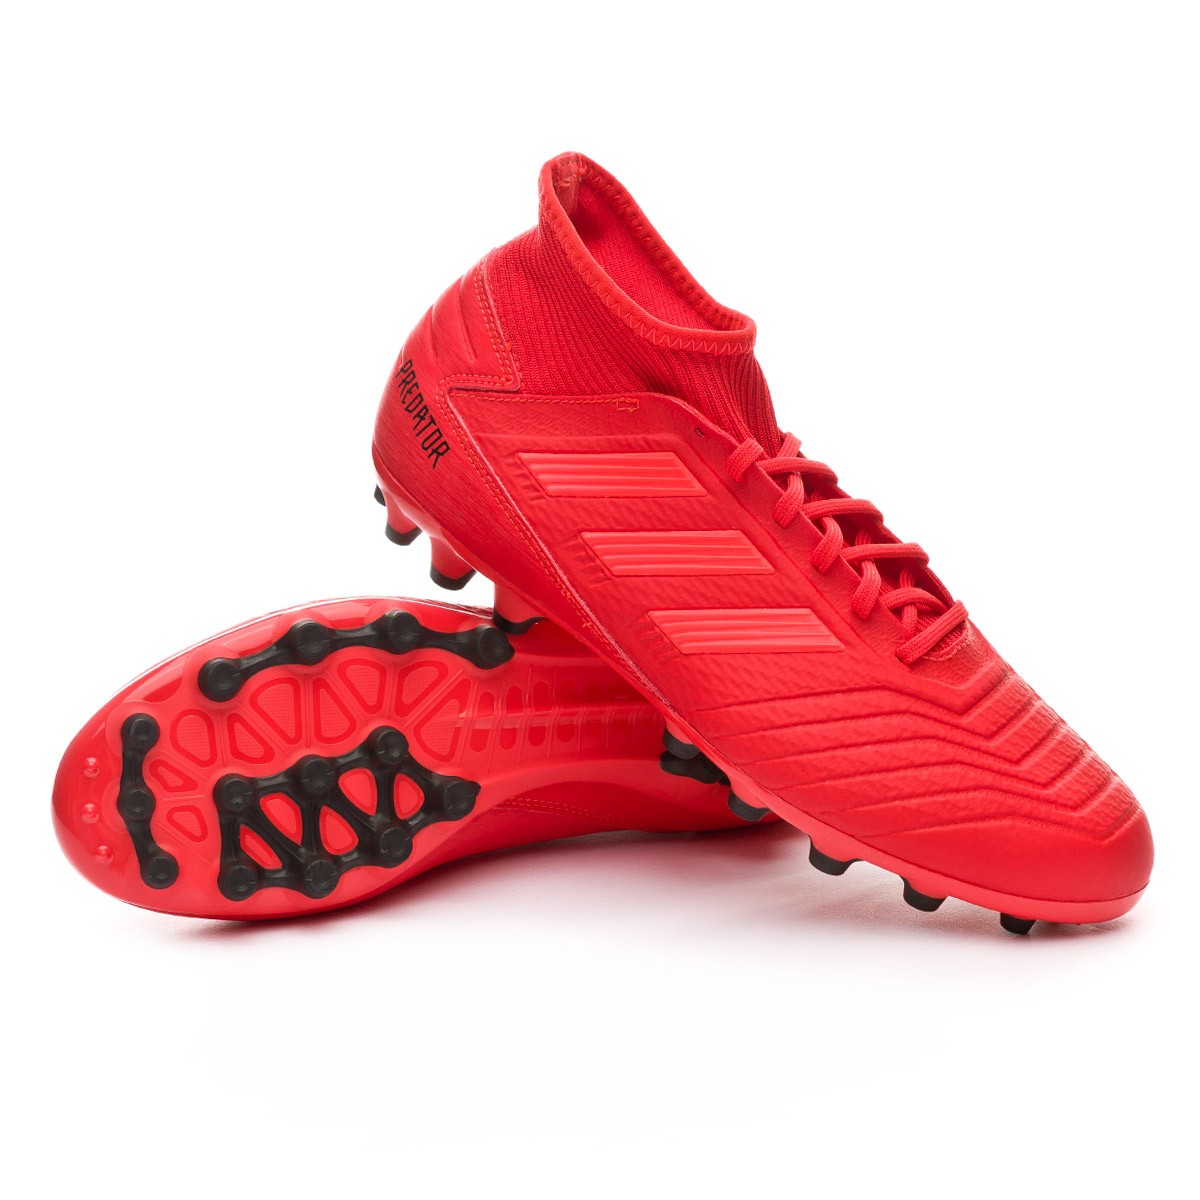 Football Boots adidas Predator 19.3 AG Active red-Solar red-Core black -  Football store Fútbol Emotion